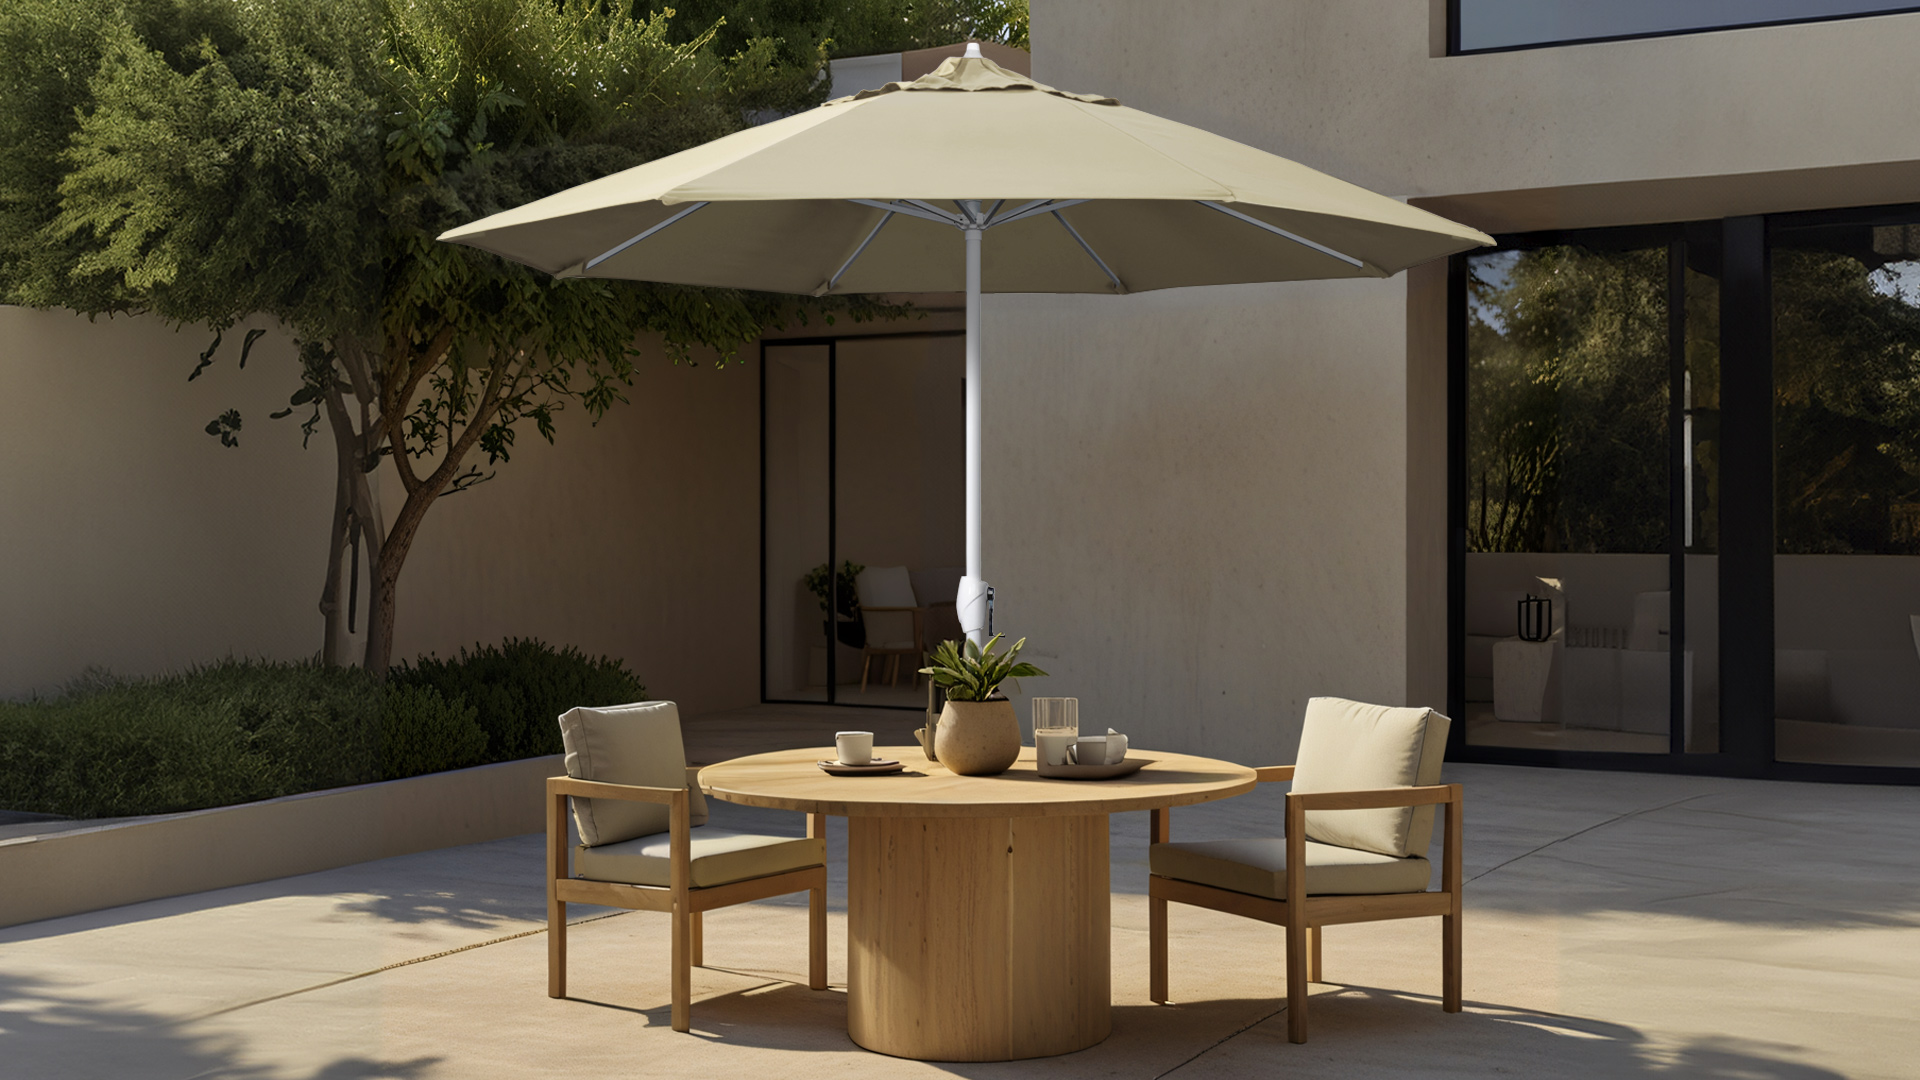 Outdoor Design Inspirations: Uplift Your Space with the Casa Series Patio Umbrella